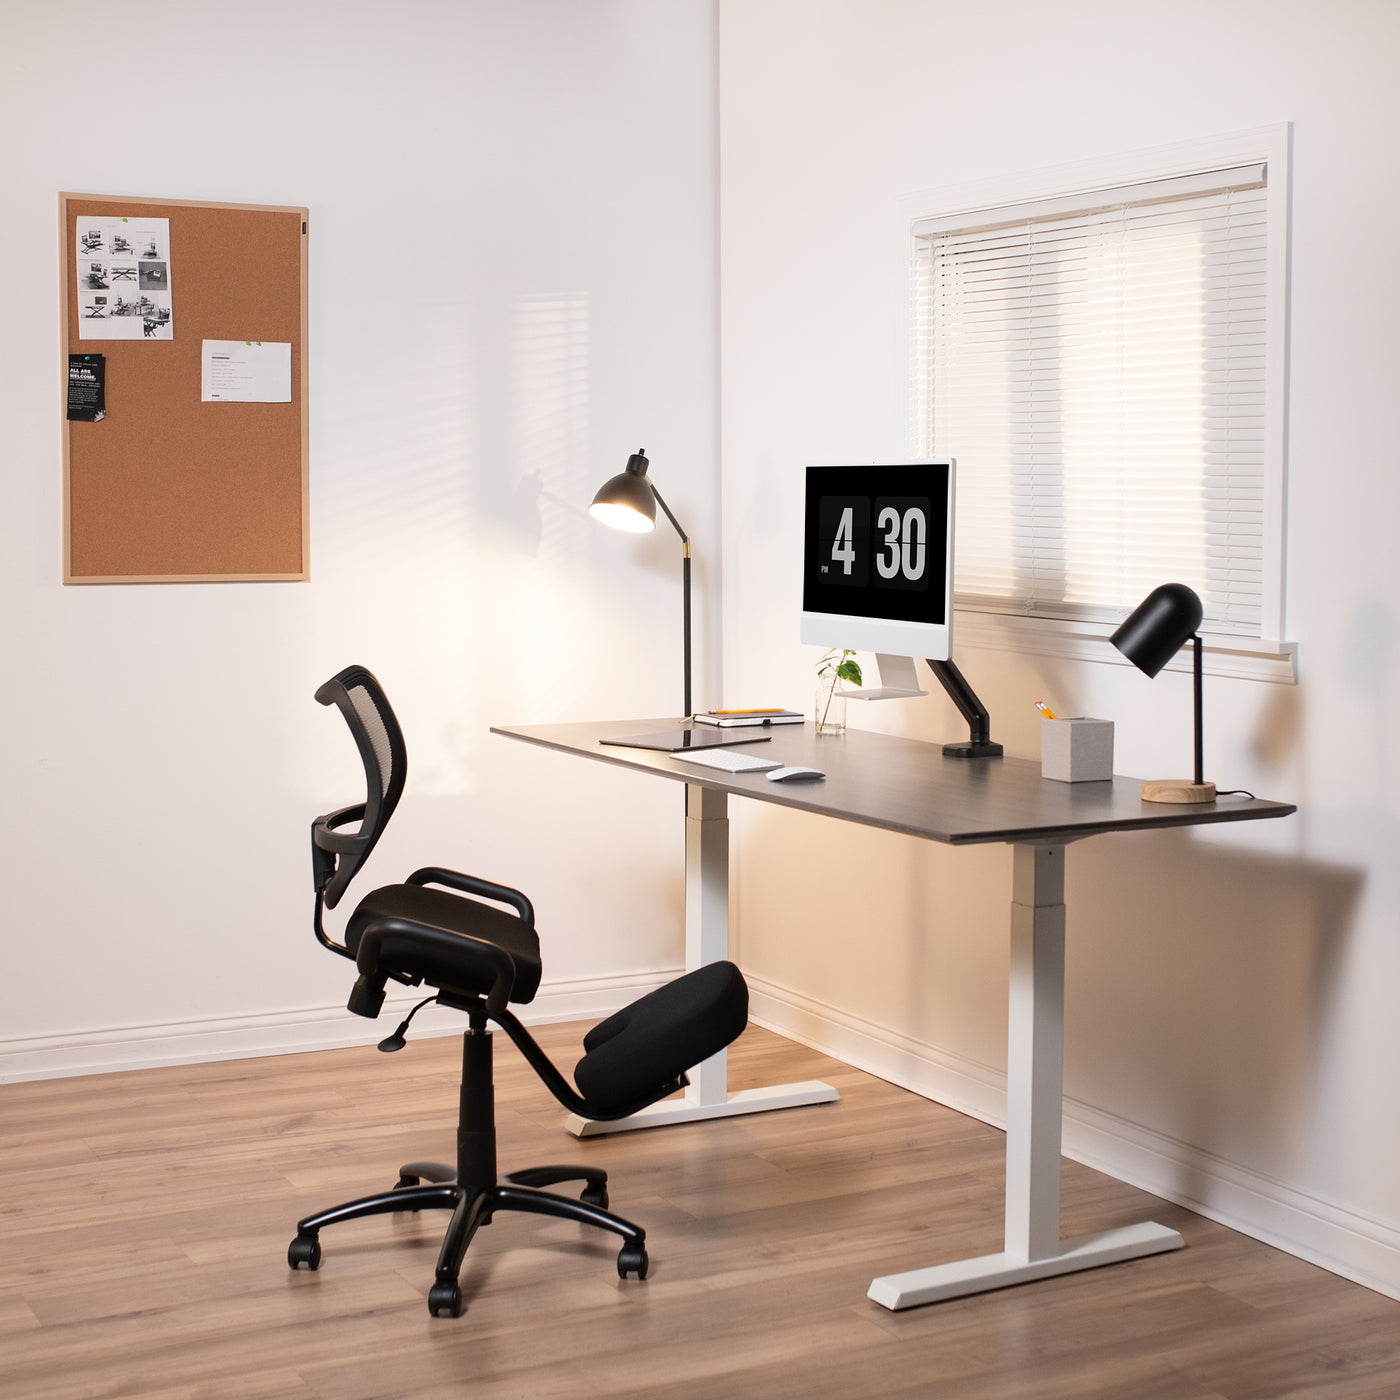 Modern office with kneeling chair and M1 MAC mounted to a desktop for ergonomic viewing angles.